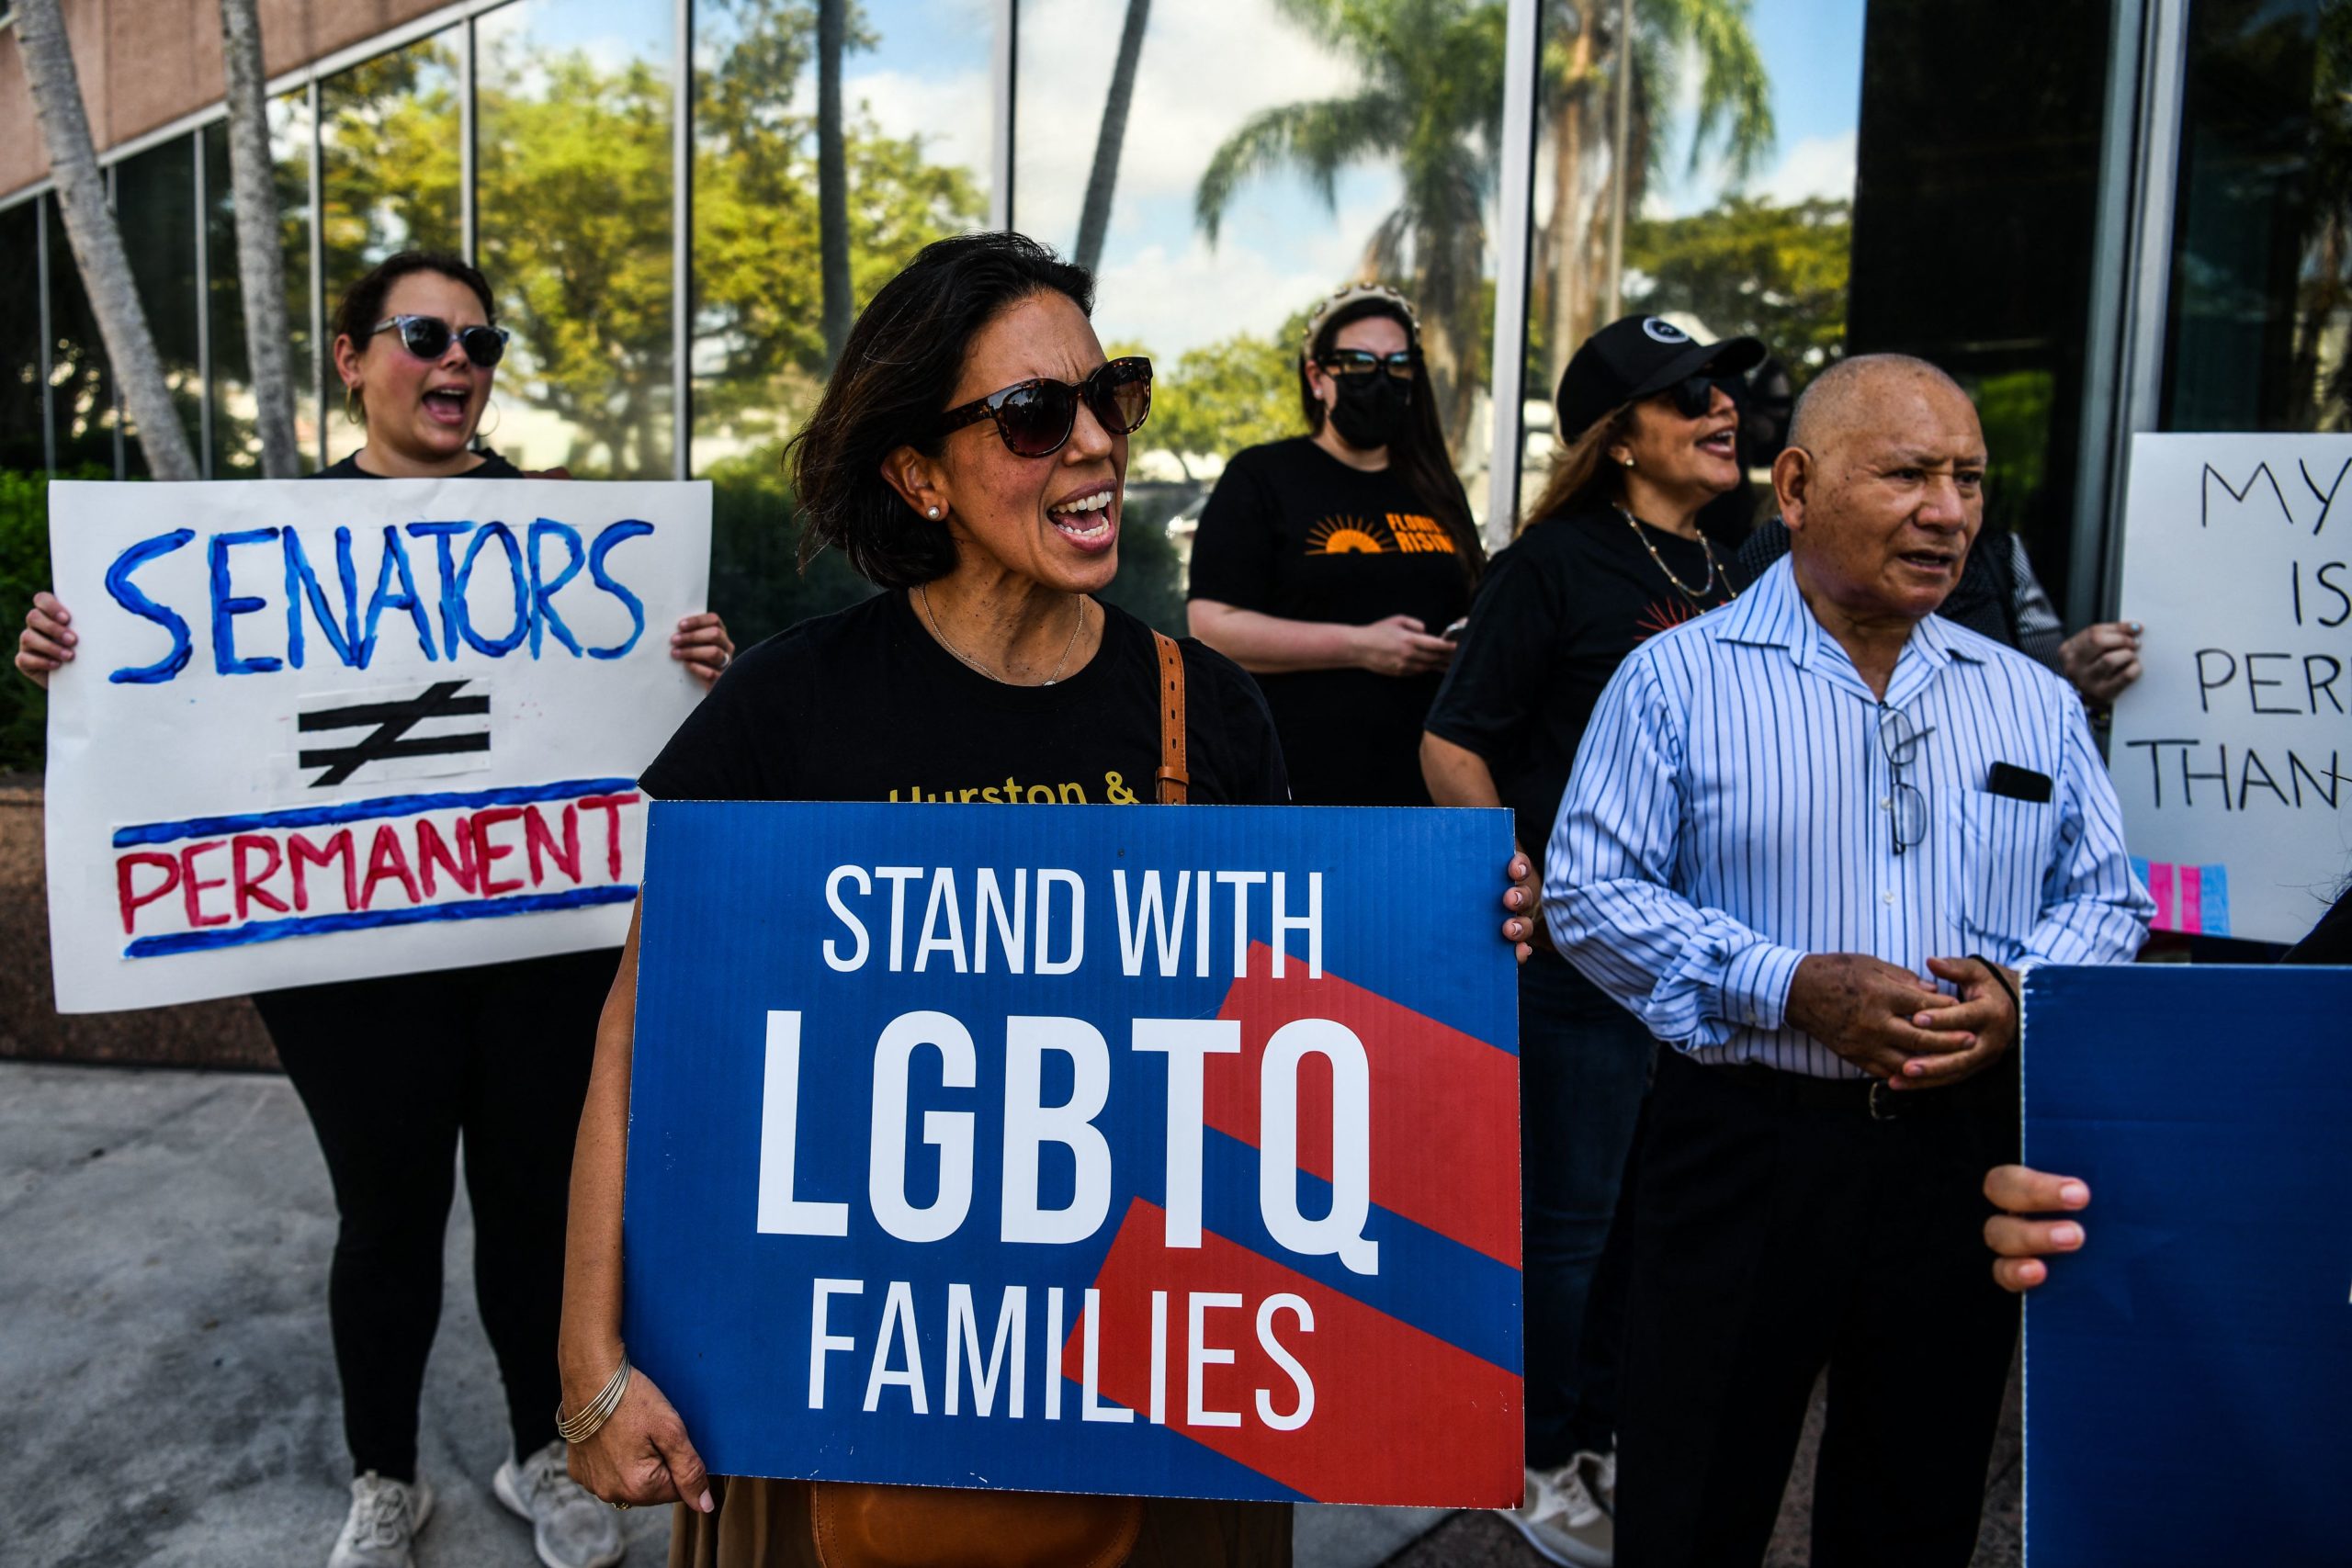 People hold placards and shout slogans as they protest outside the office of Florida State Senator Ileana Garcia in Coral Gables, Florida, on March 9, 2022. - Both the Florida Senate and House passed a bill that would limit what classrooms can teach about sexual orientation and gender identity. (Photo by CHANDAN KHANNA / AFP) (Photo by CHANDAN KHANNA/AFP via Getty Images)